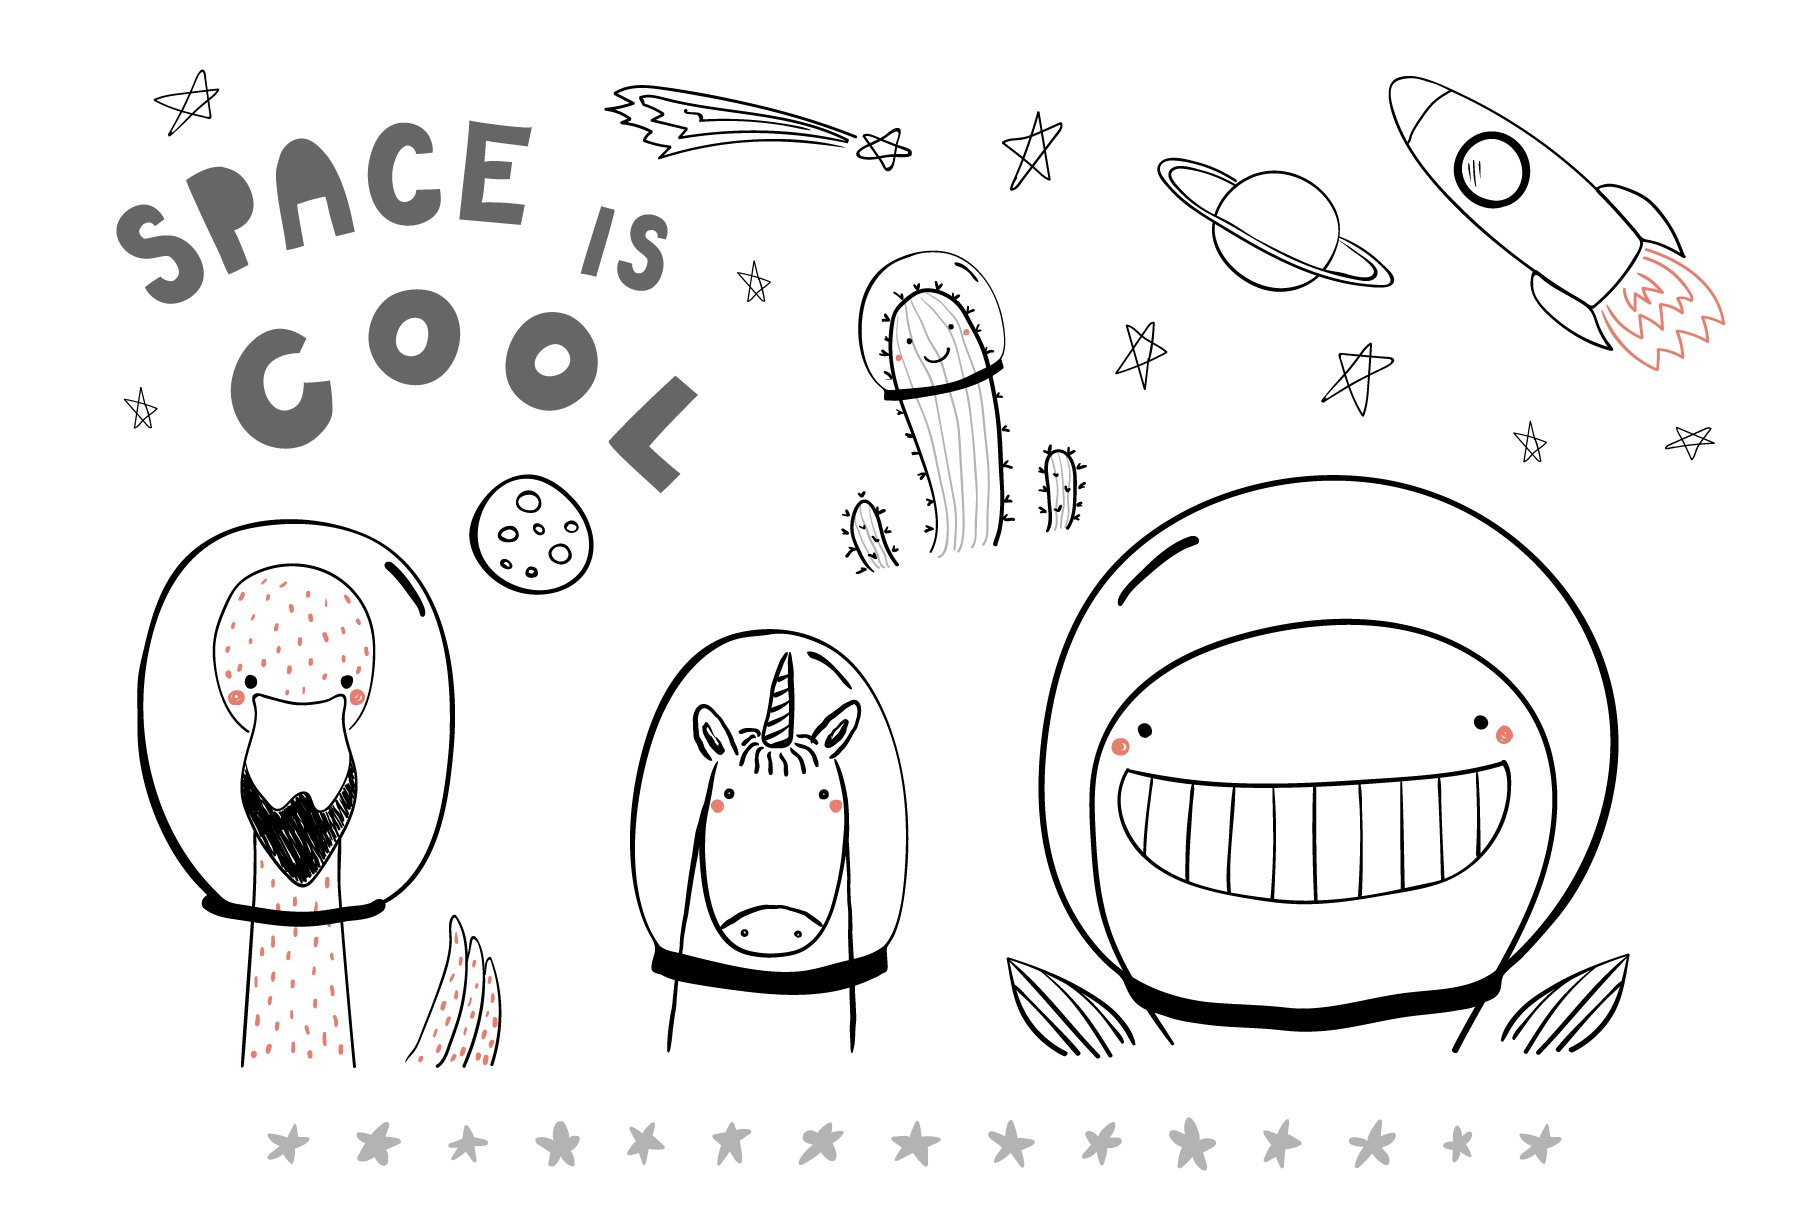 Space is cool illustrations.